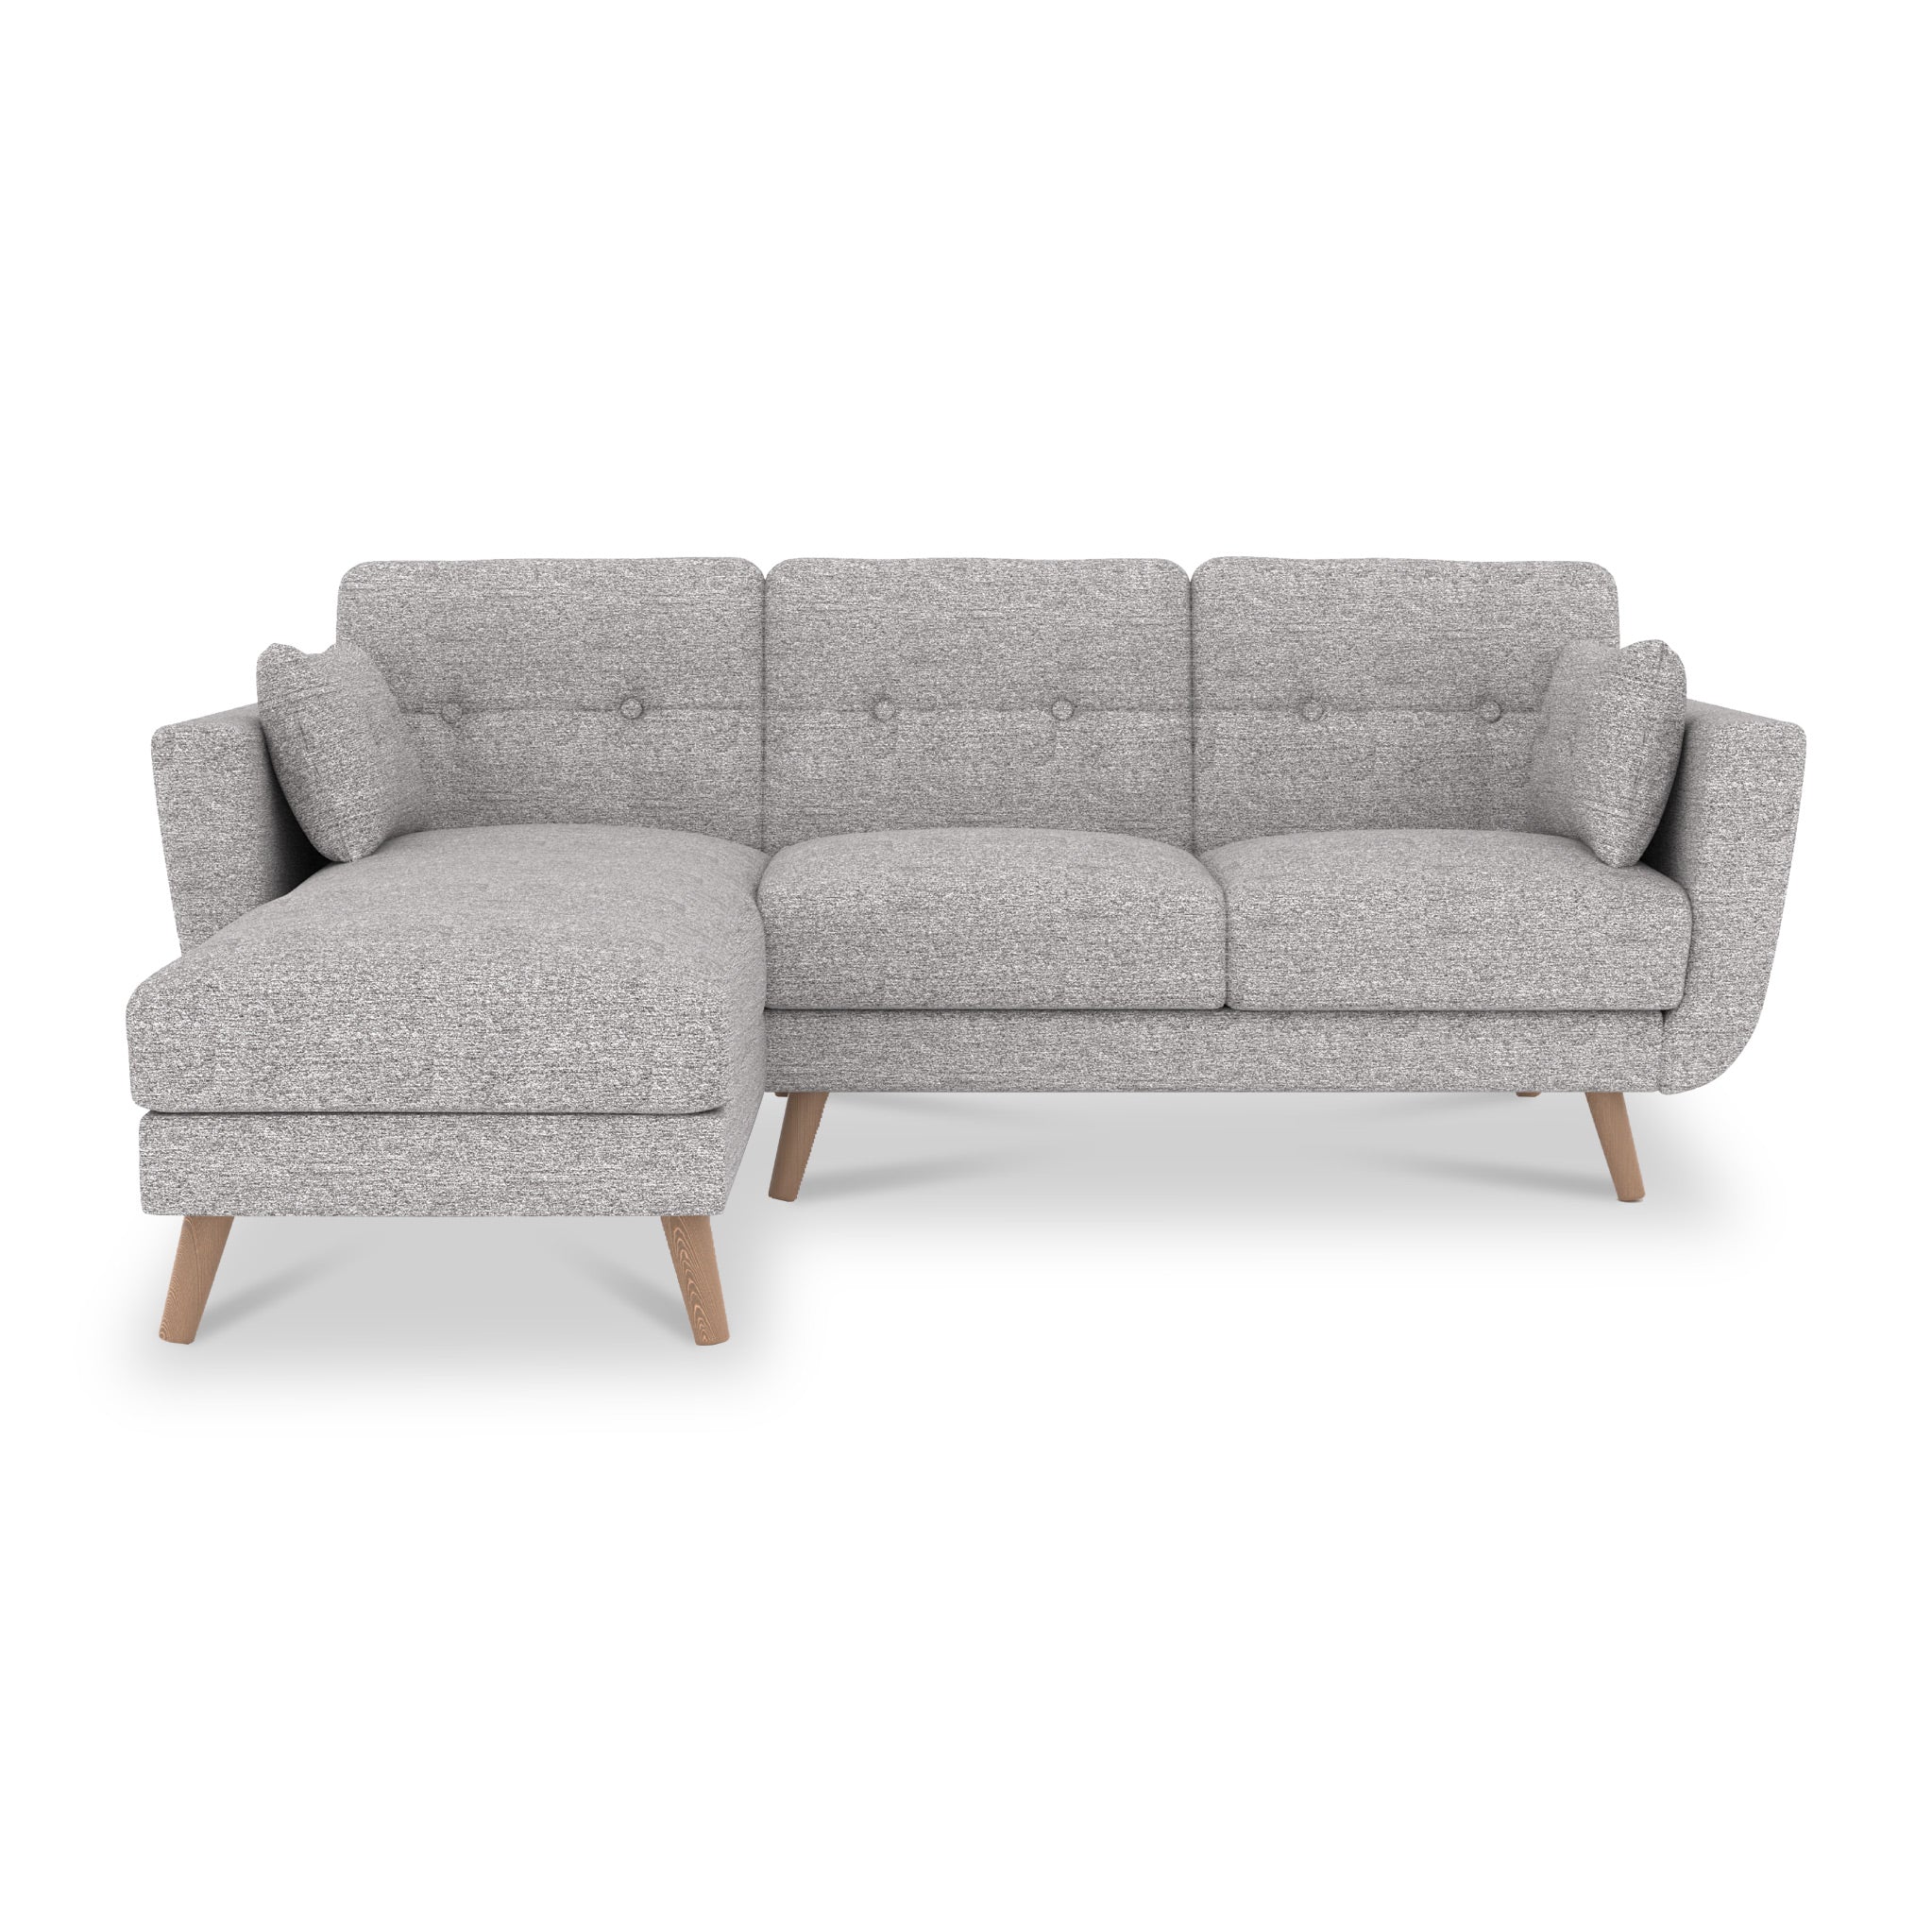 Trom Grey Linen Chaise Corner Sofabed Sofa